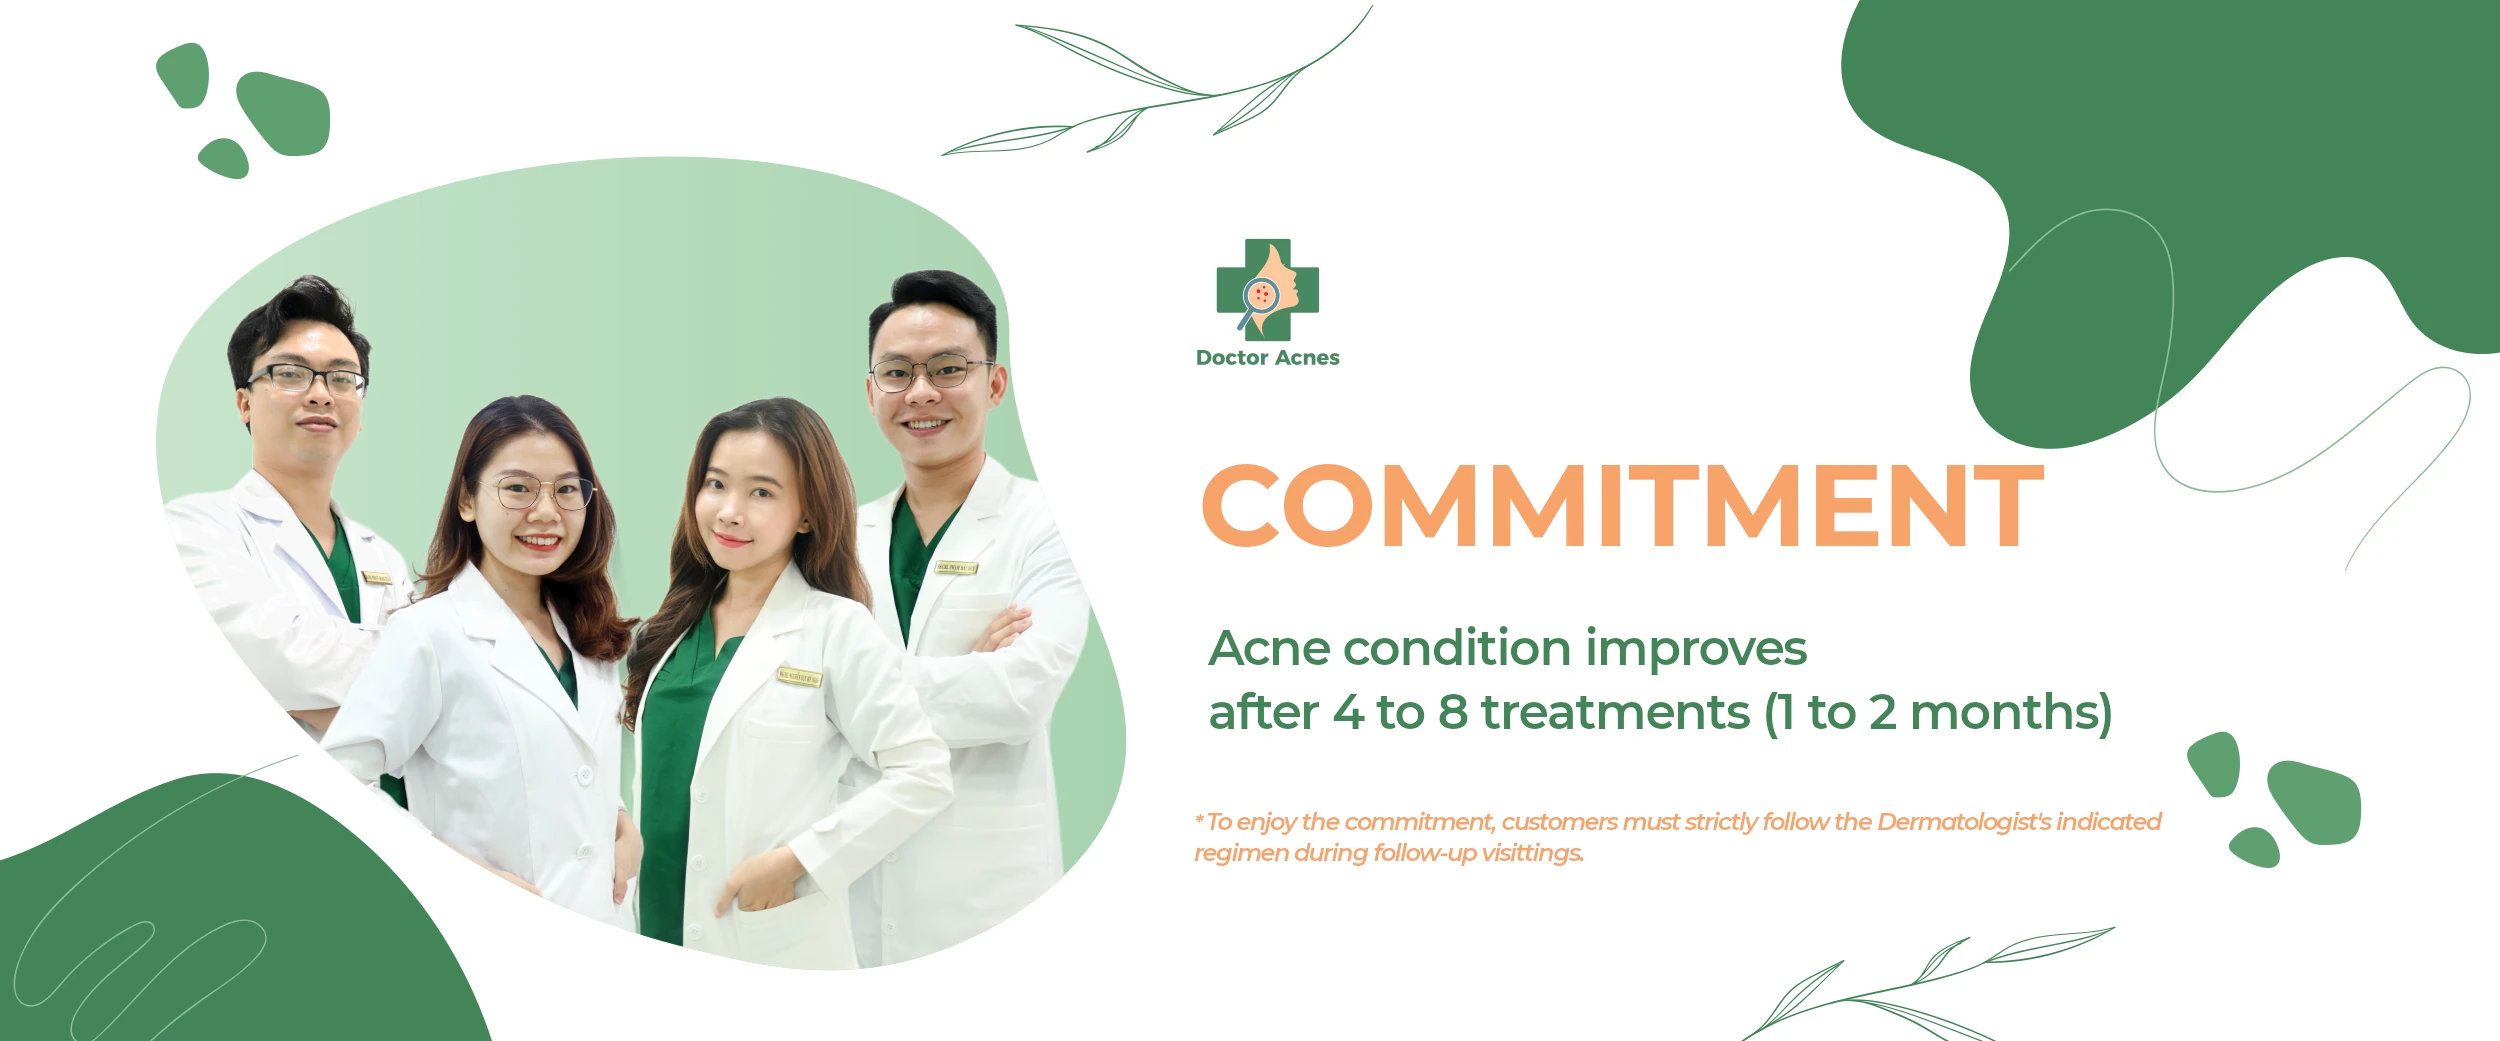 Acne treatment commitment Doctor Acnes